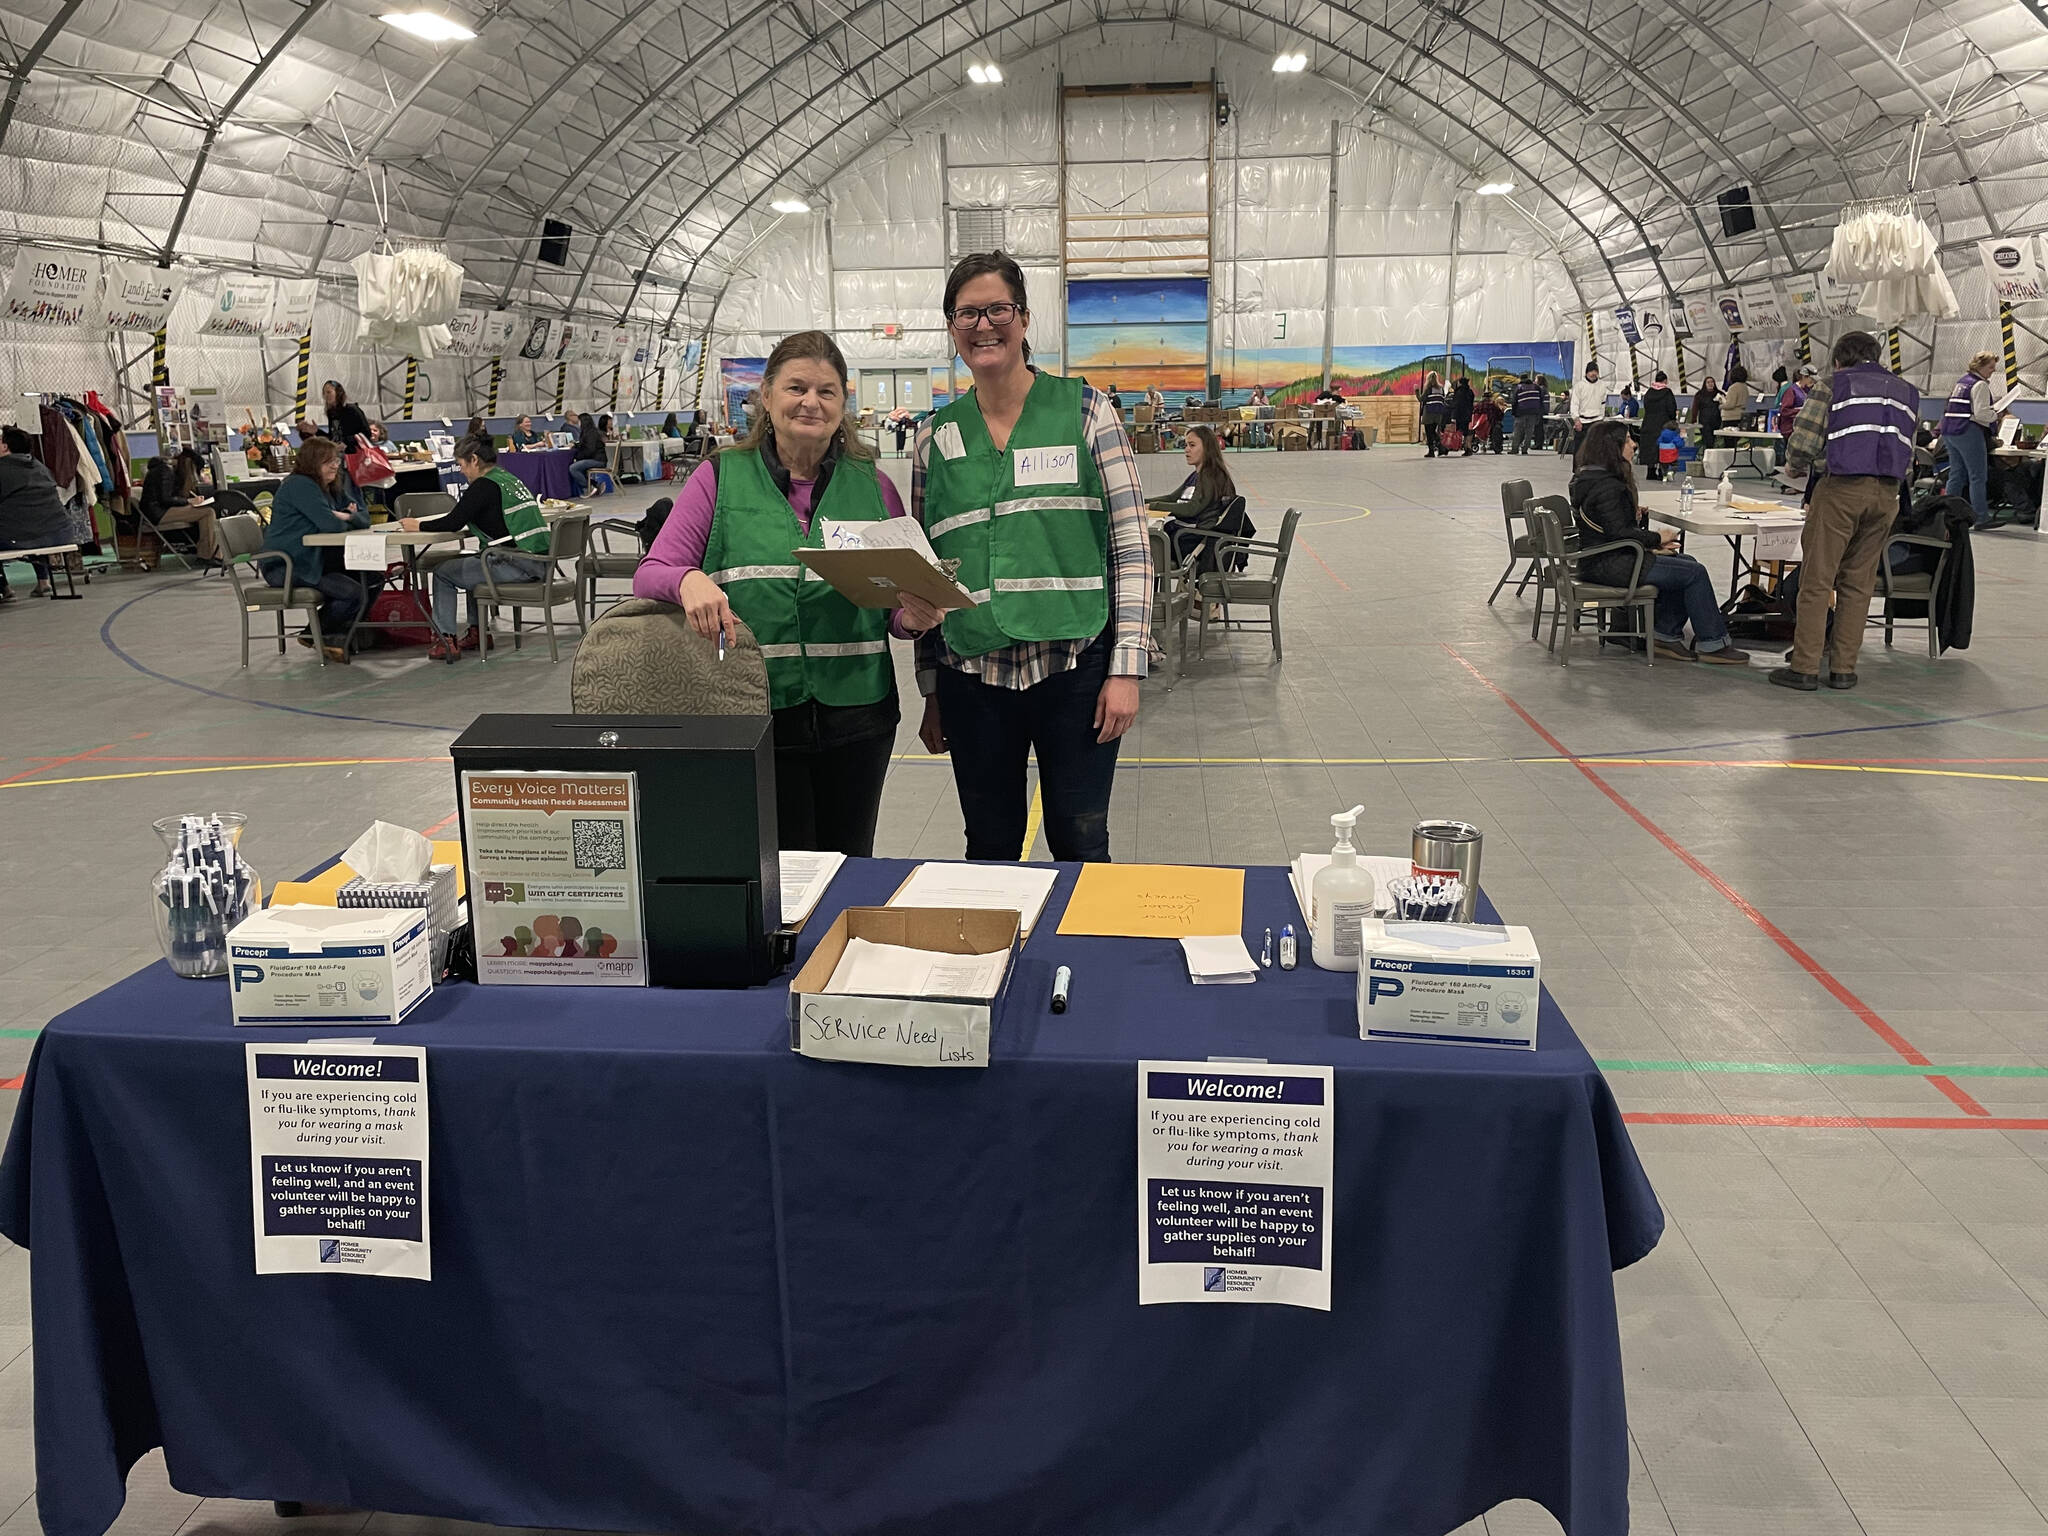 Allison O'Neil and Shari Daugherty serve as volunteers for Community Resource Connect at the SPARC Building in Homer, Alaska on Tuesday. Photo by Emilie Springer